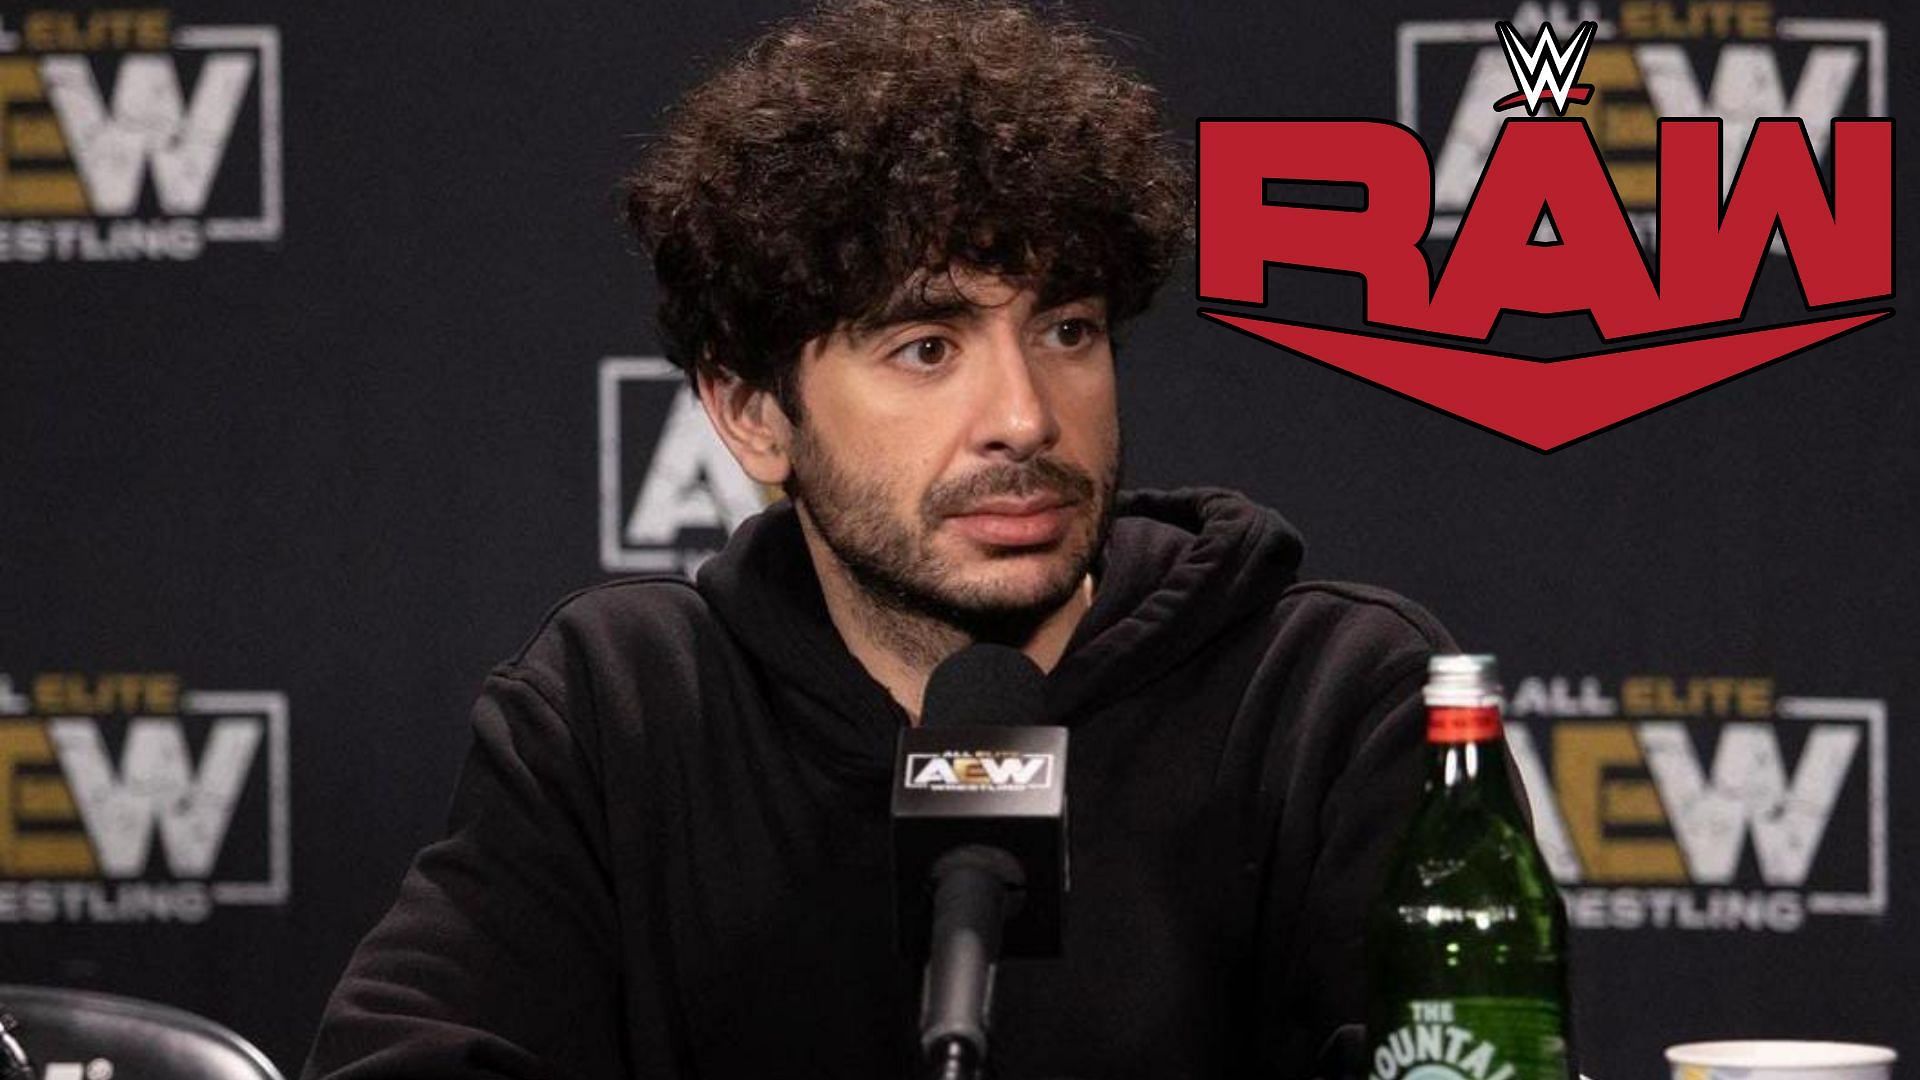 Did this WWE star take a shot at Tony Khan and AEW?